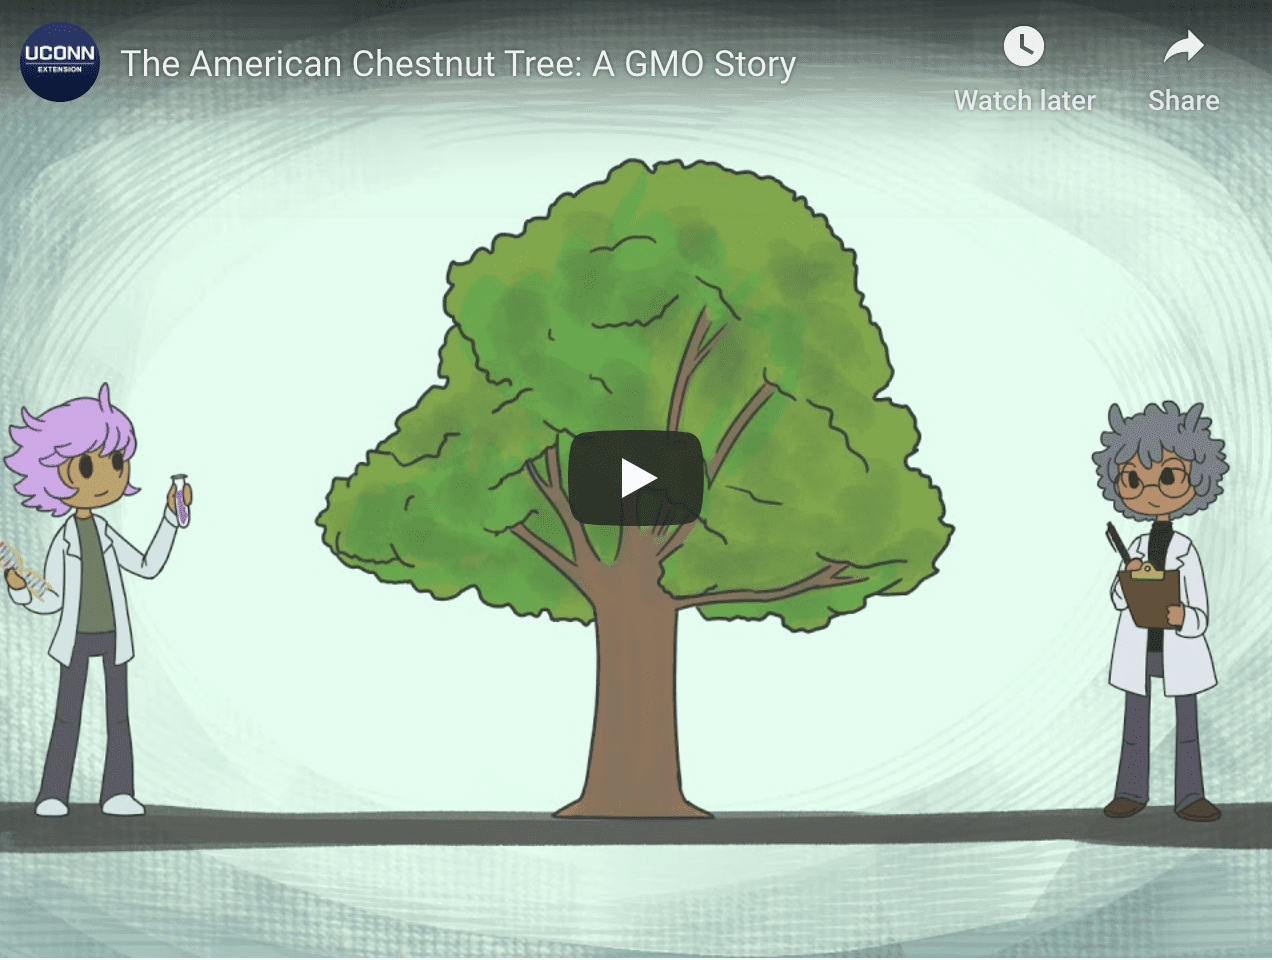 American Chestnut Tree animation opening video photo with tree and two people